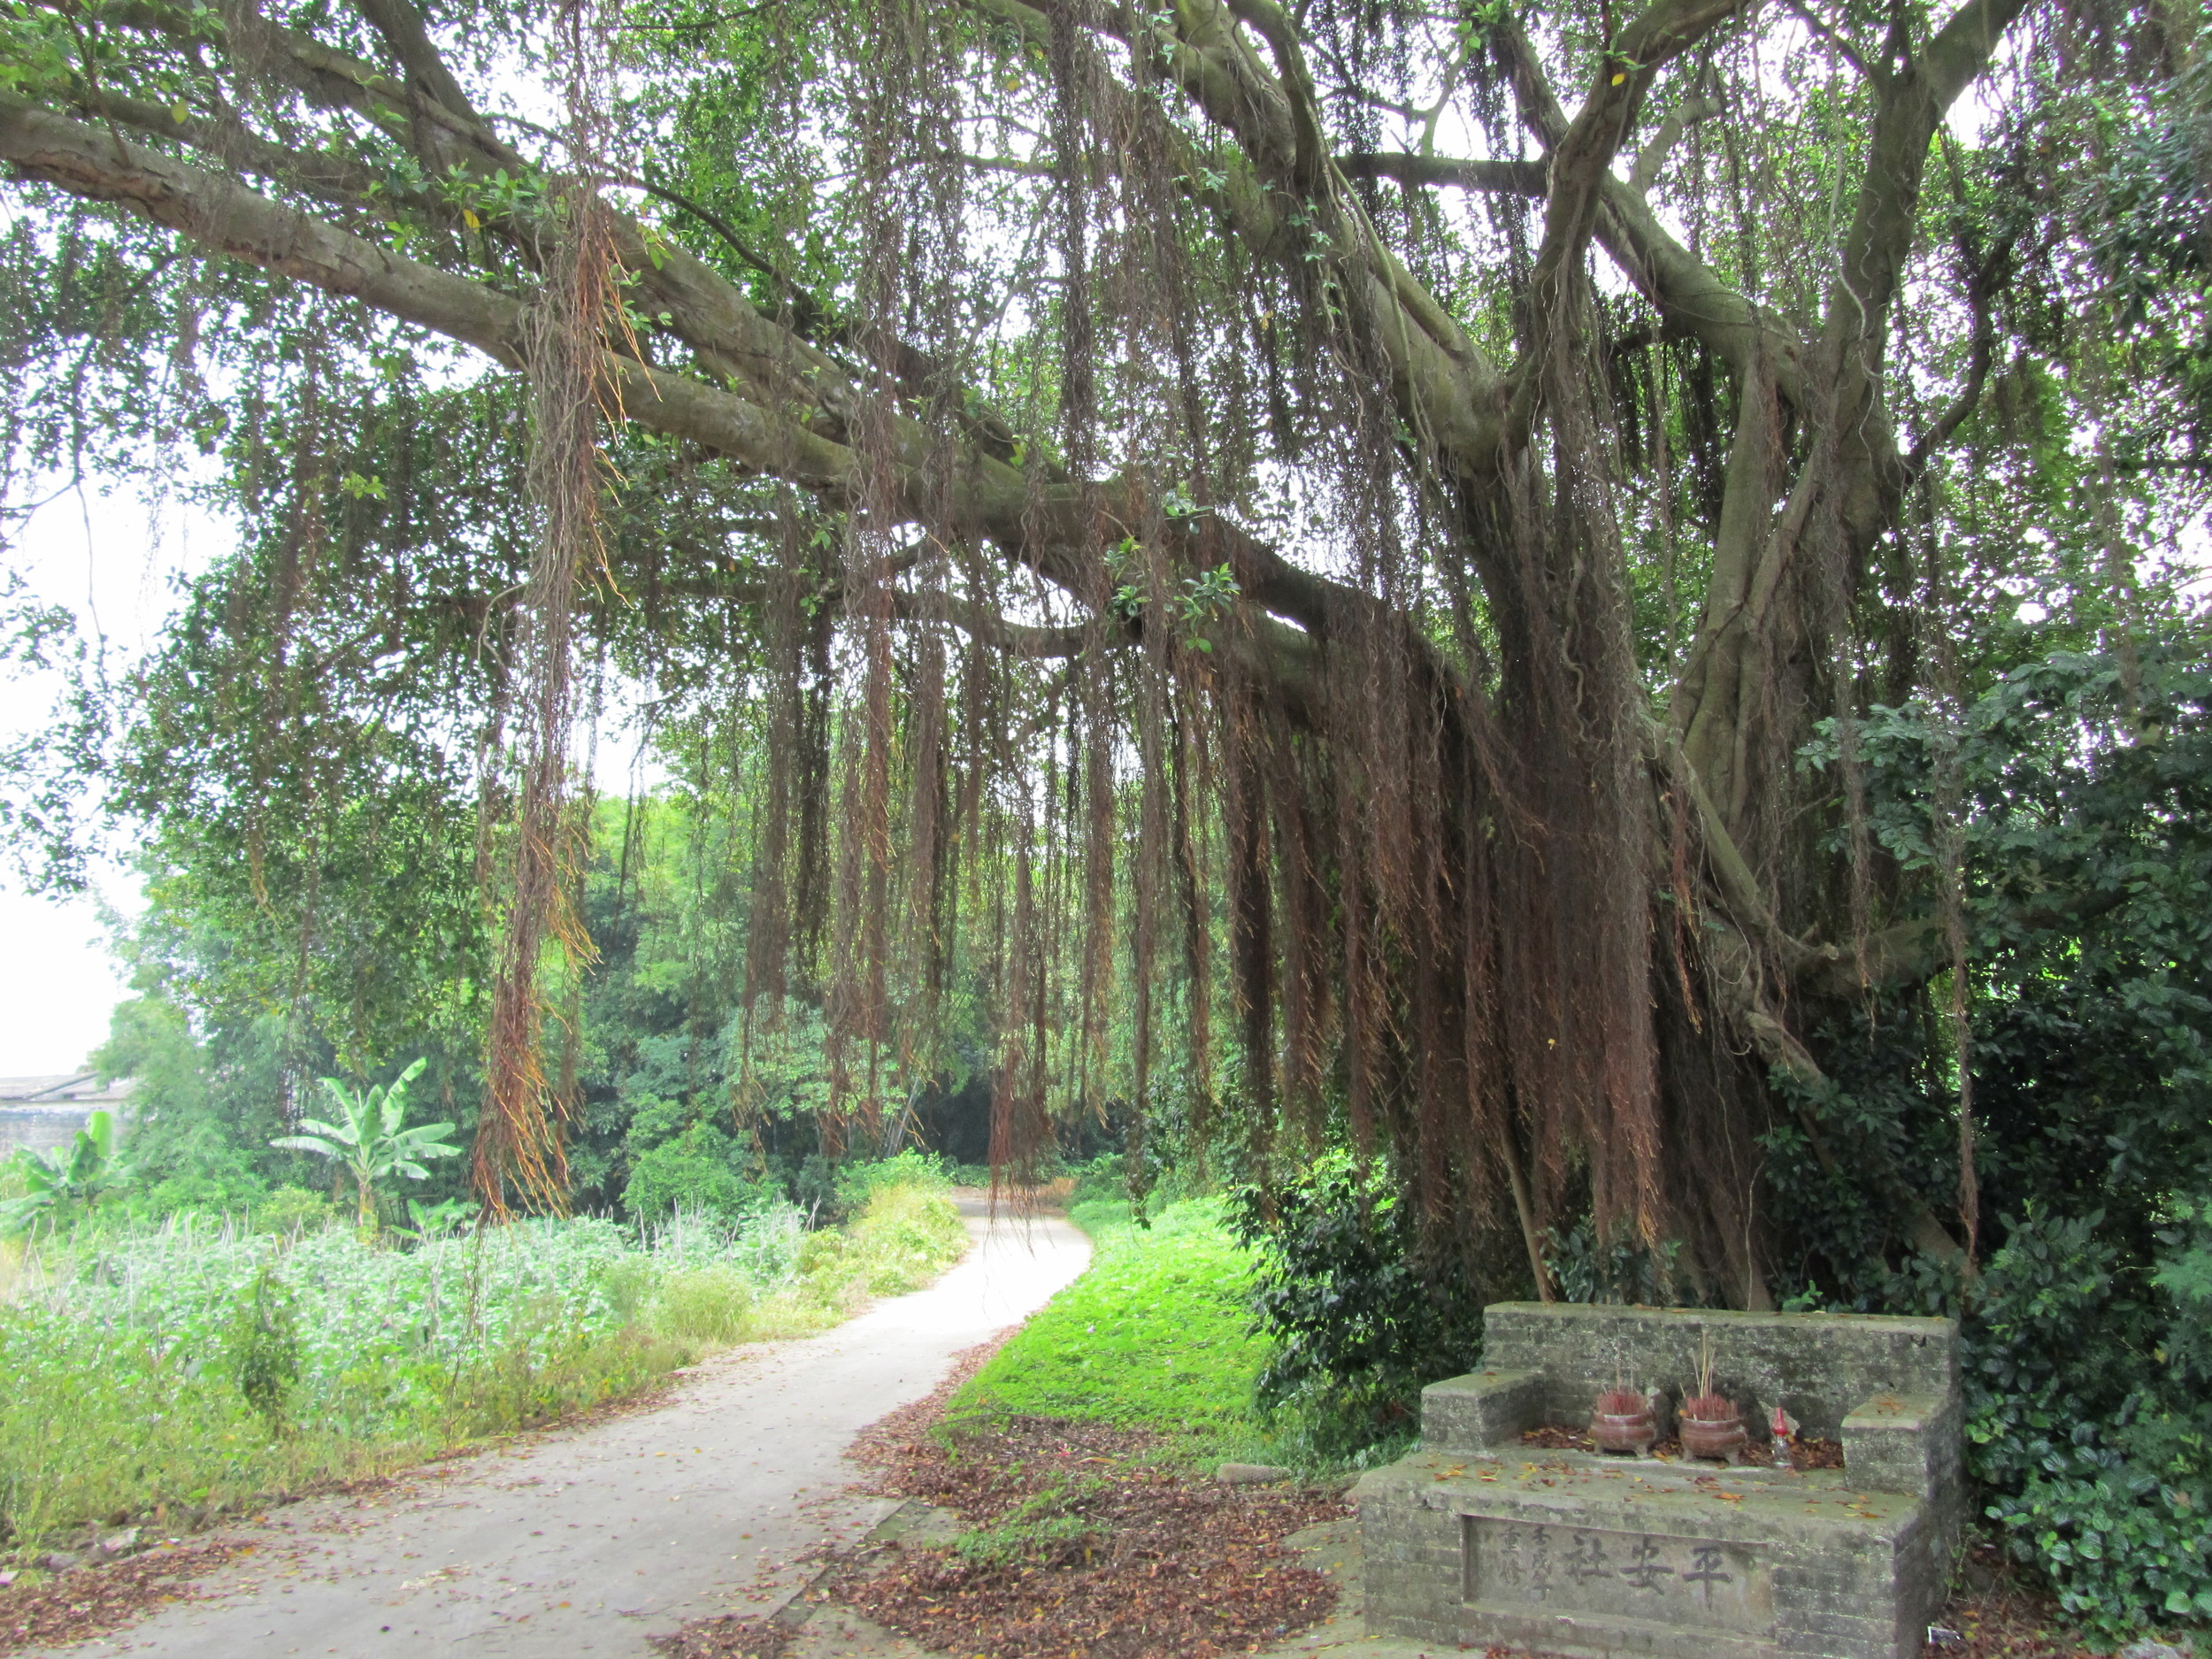 The hundred year old banyan tree at the entrance of the village.